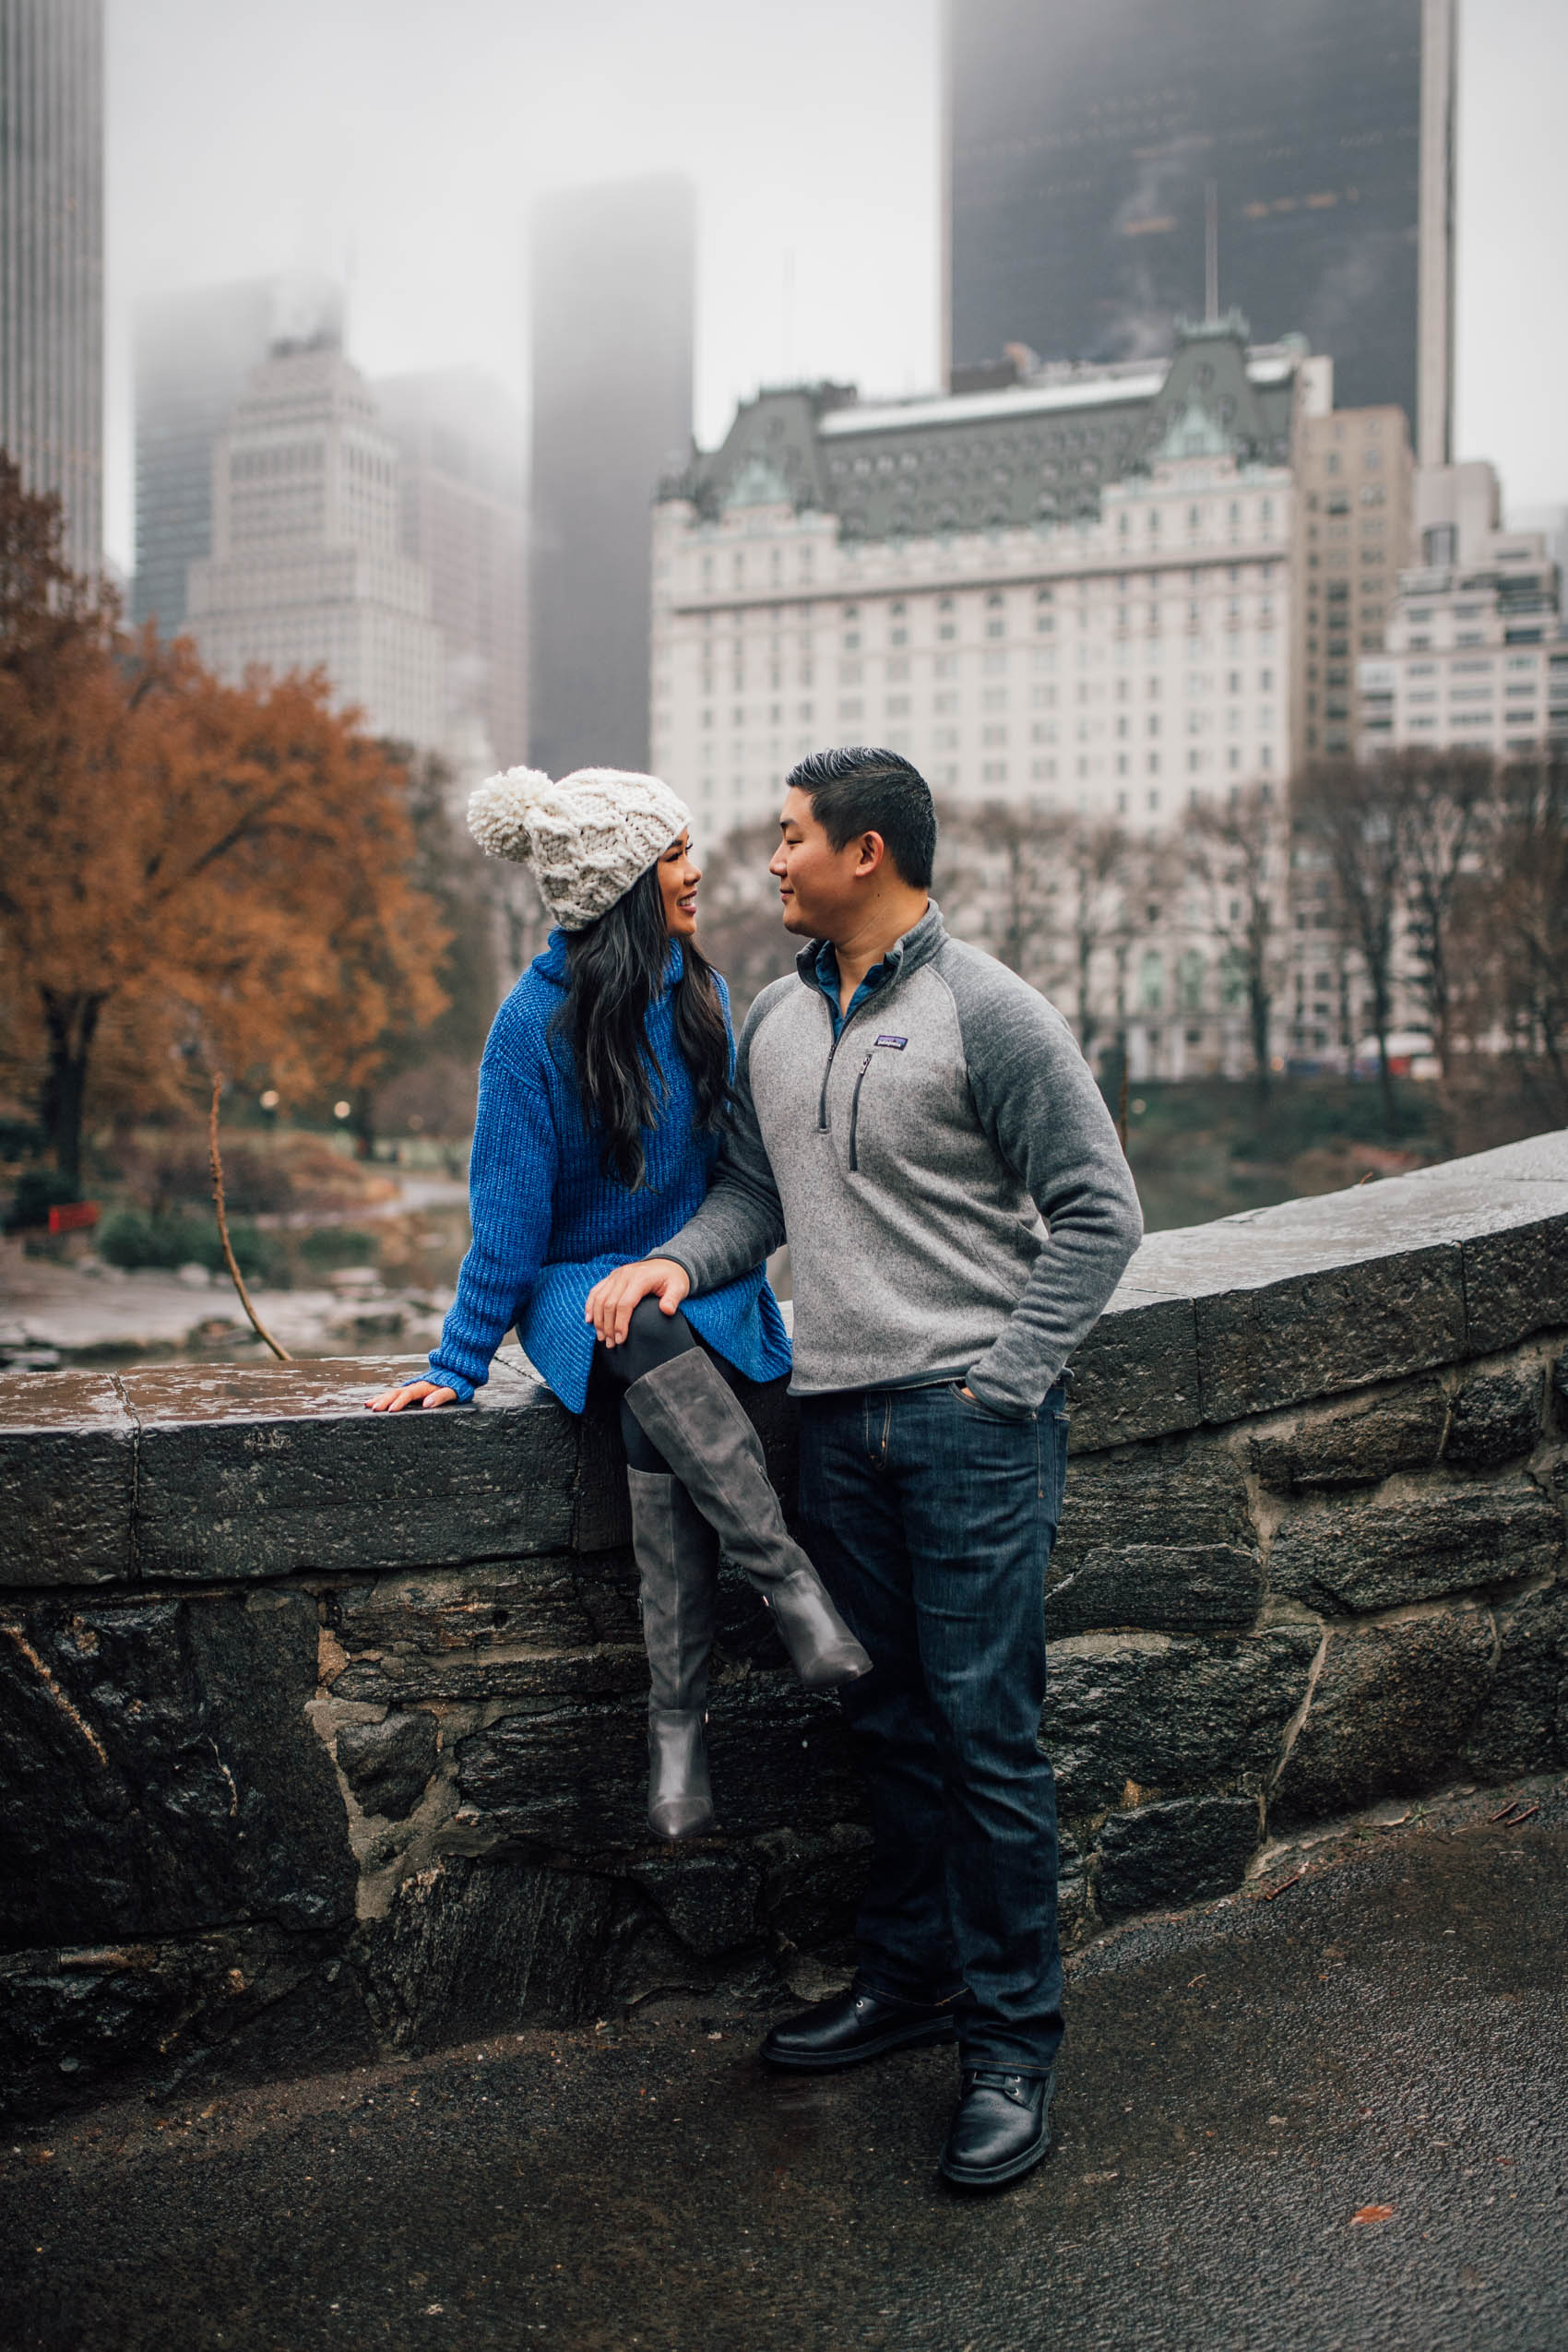 Blogger Hoang-Kim sharing the best views in Central Park in New York City